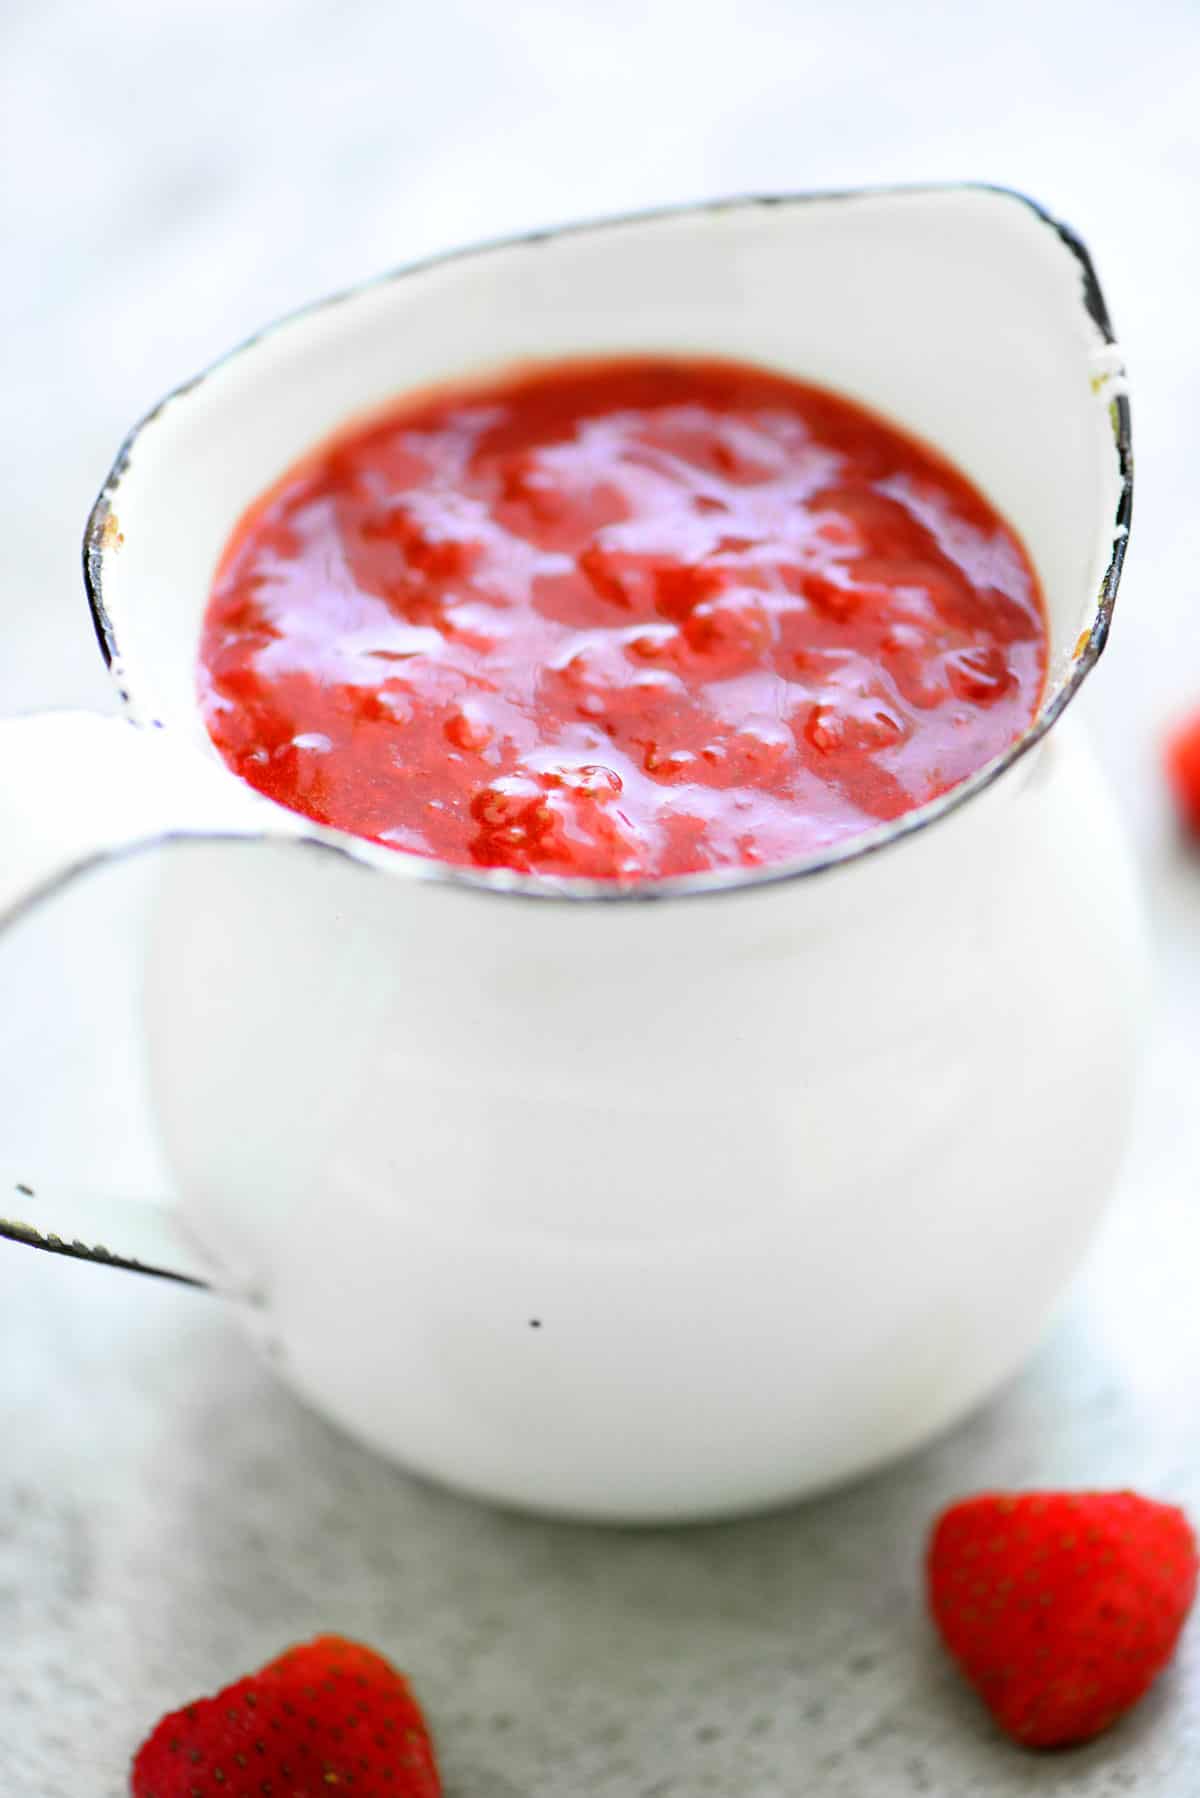 red sauce in a white pitcher with strawberries next to it